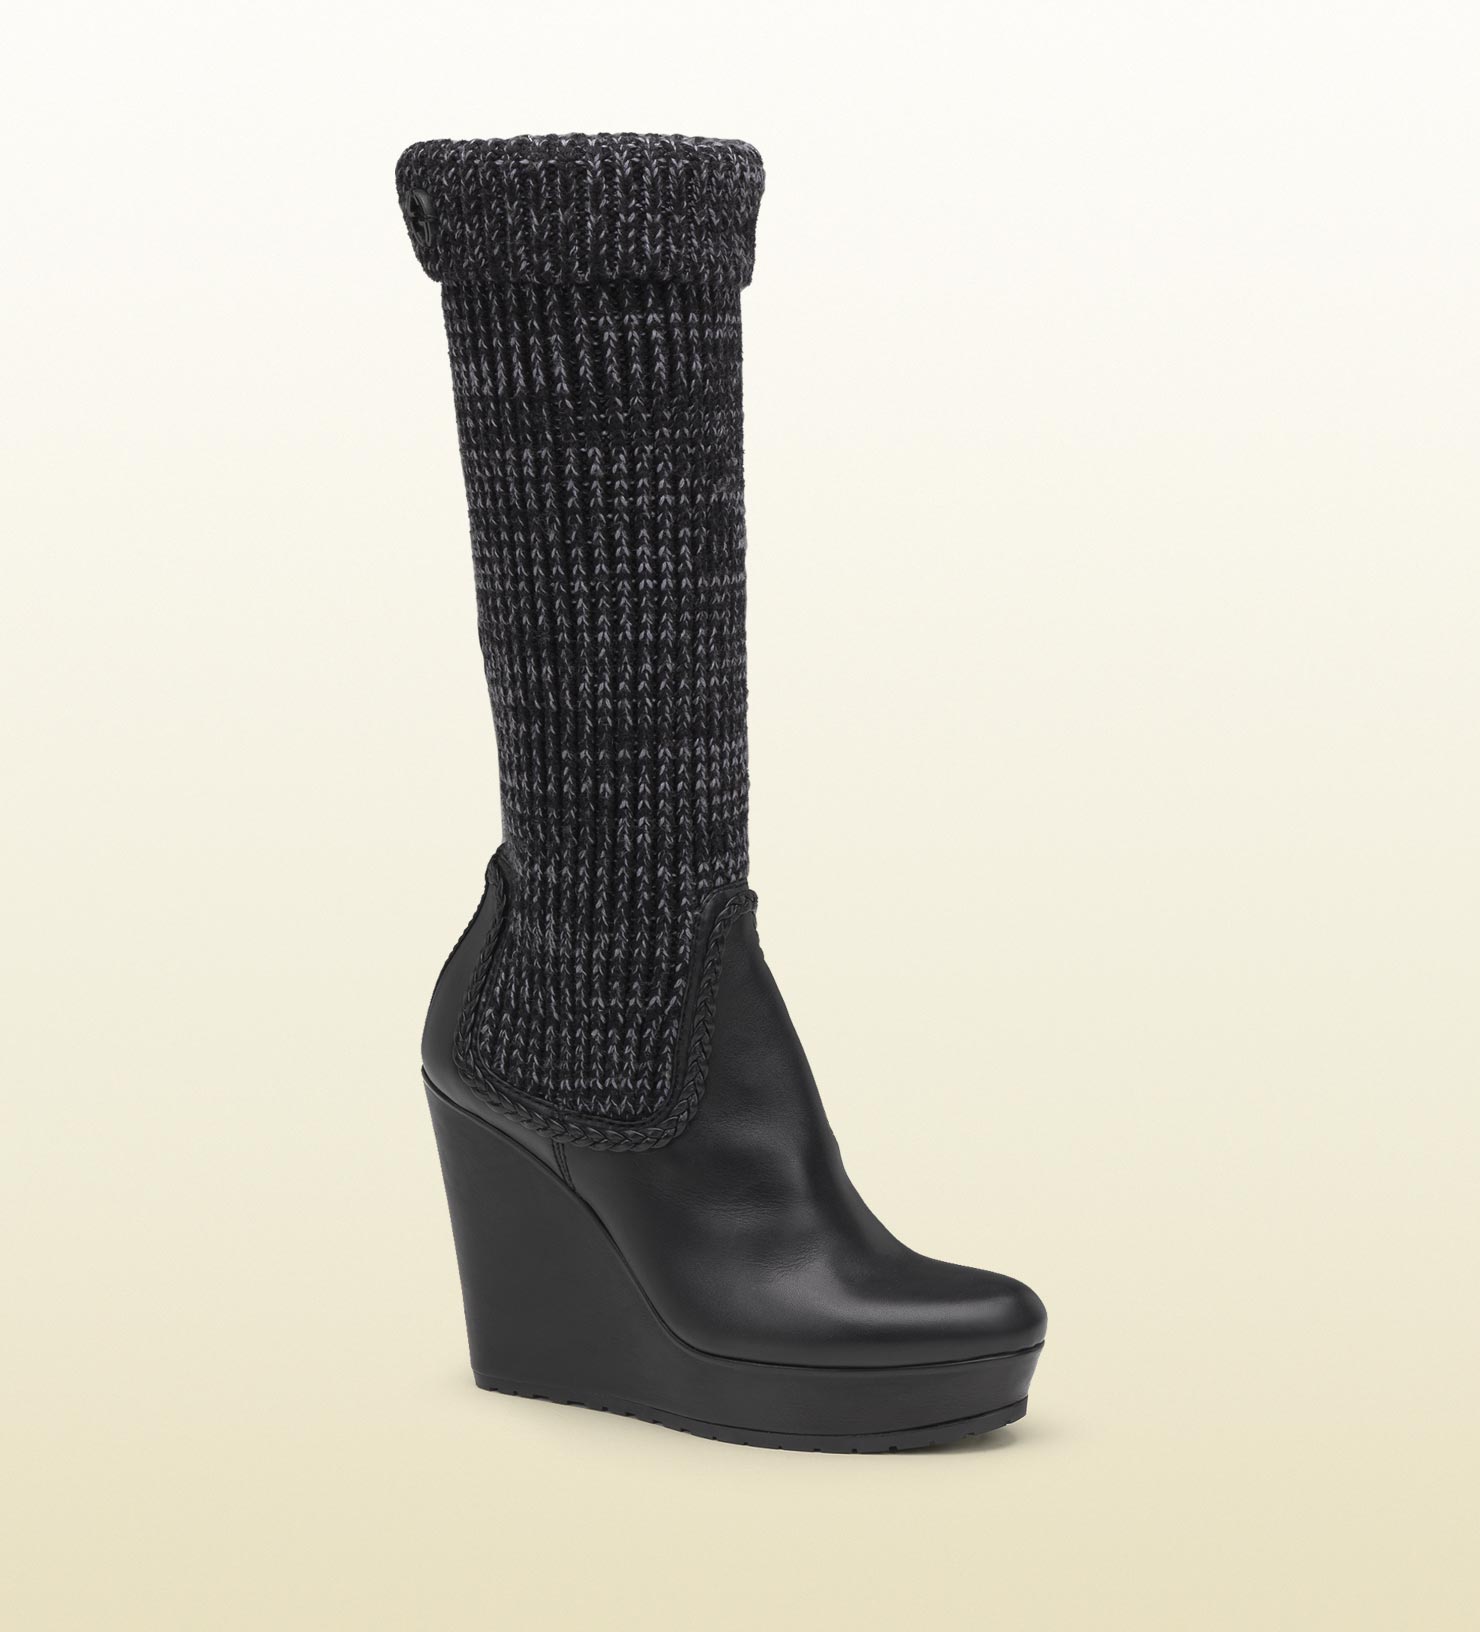 Gucci Knit Sock Wedge Boot in Black - Lyst